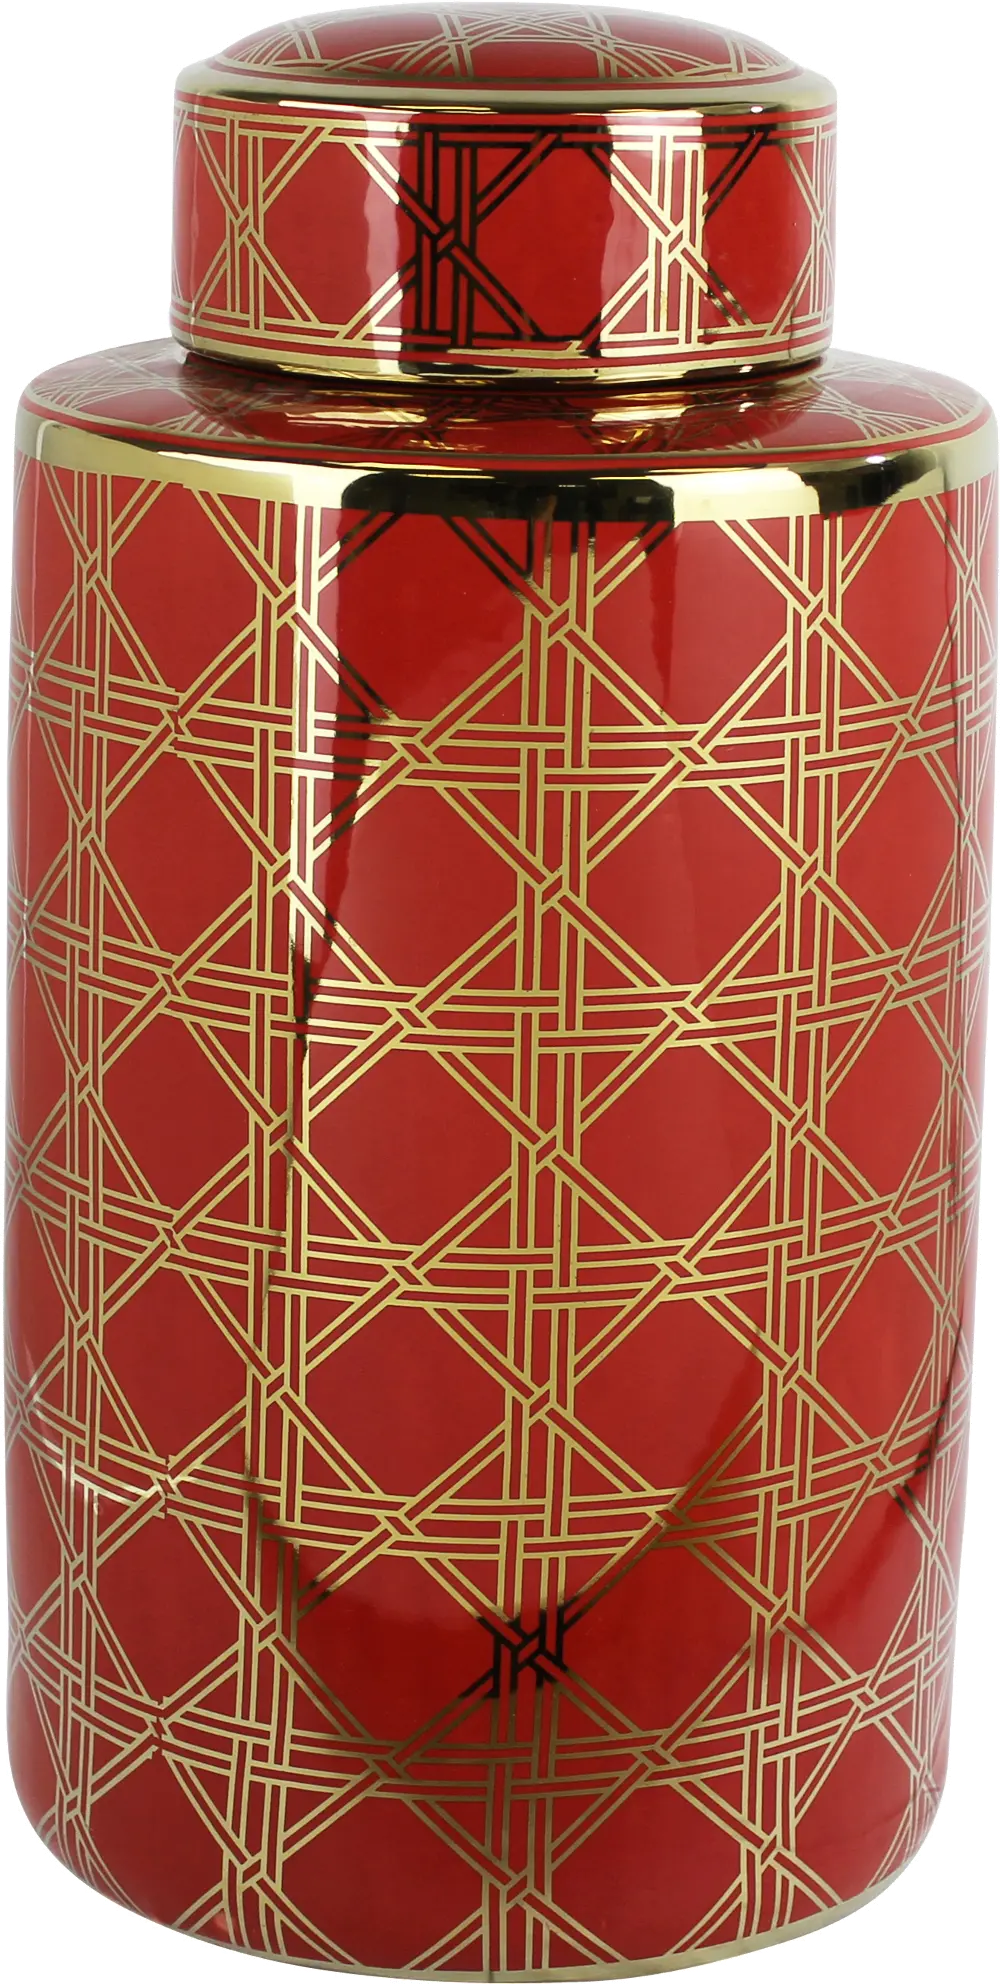 18 Inch Red and Gold Ceramic Lidded Jar-1